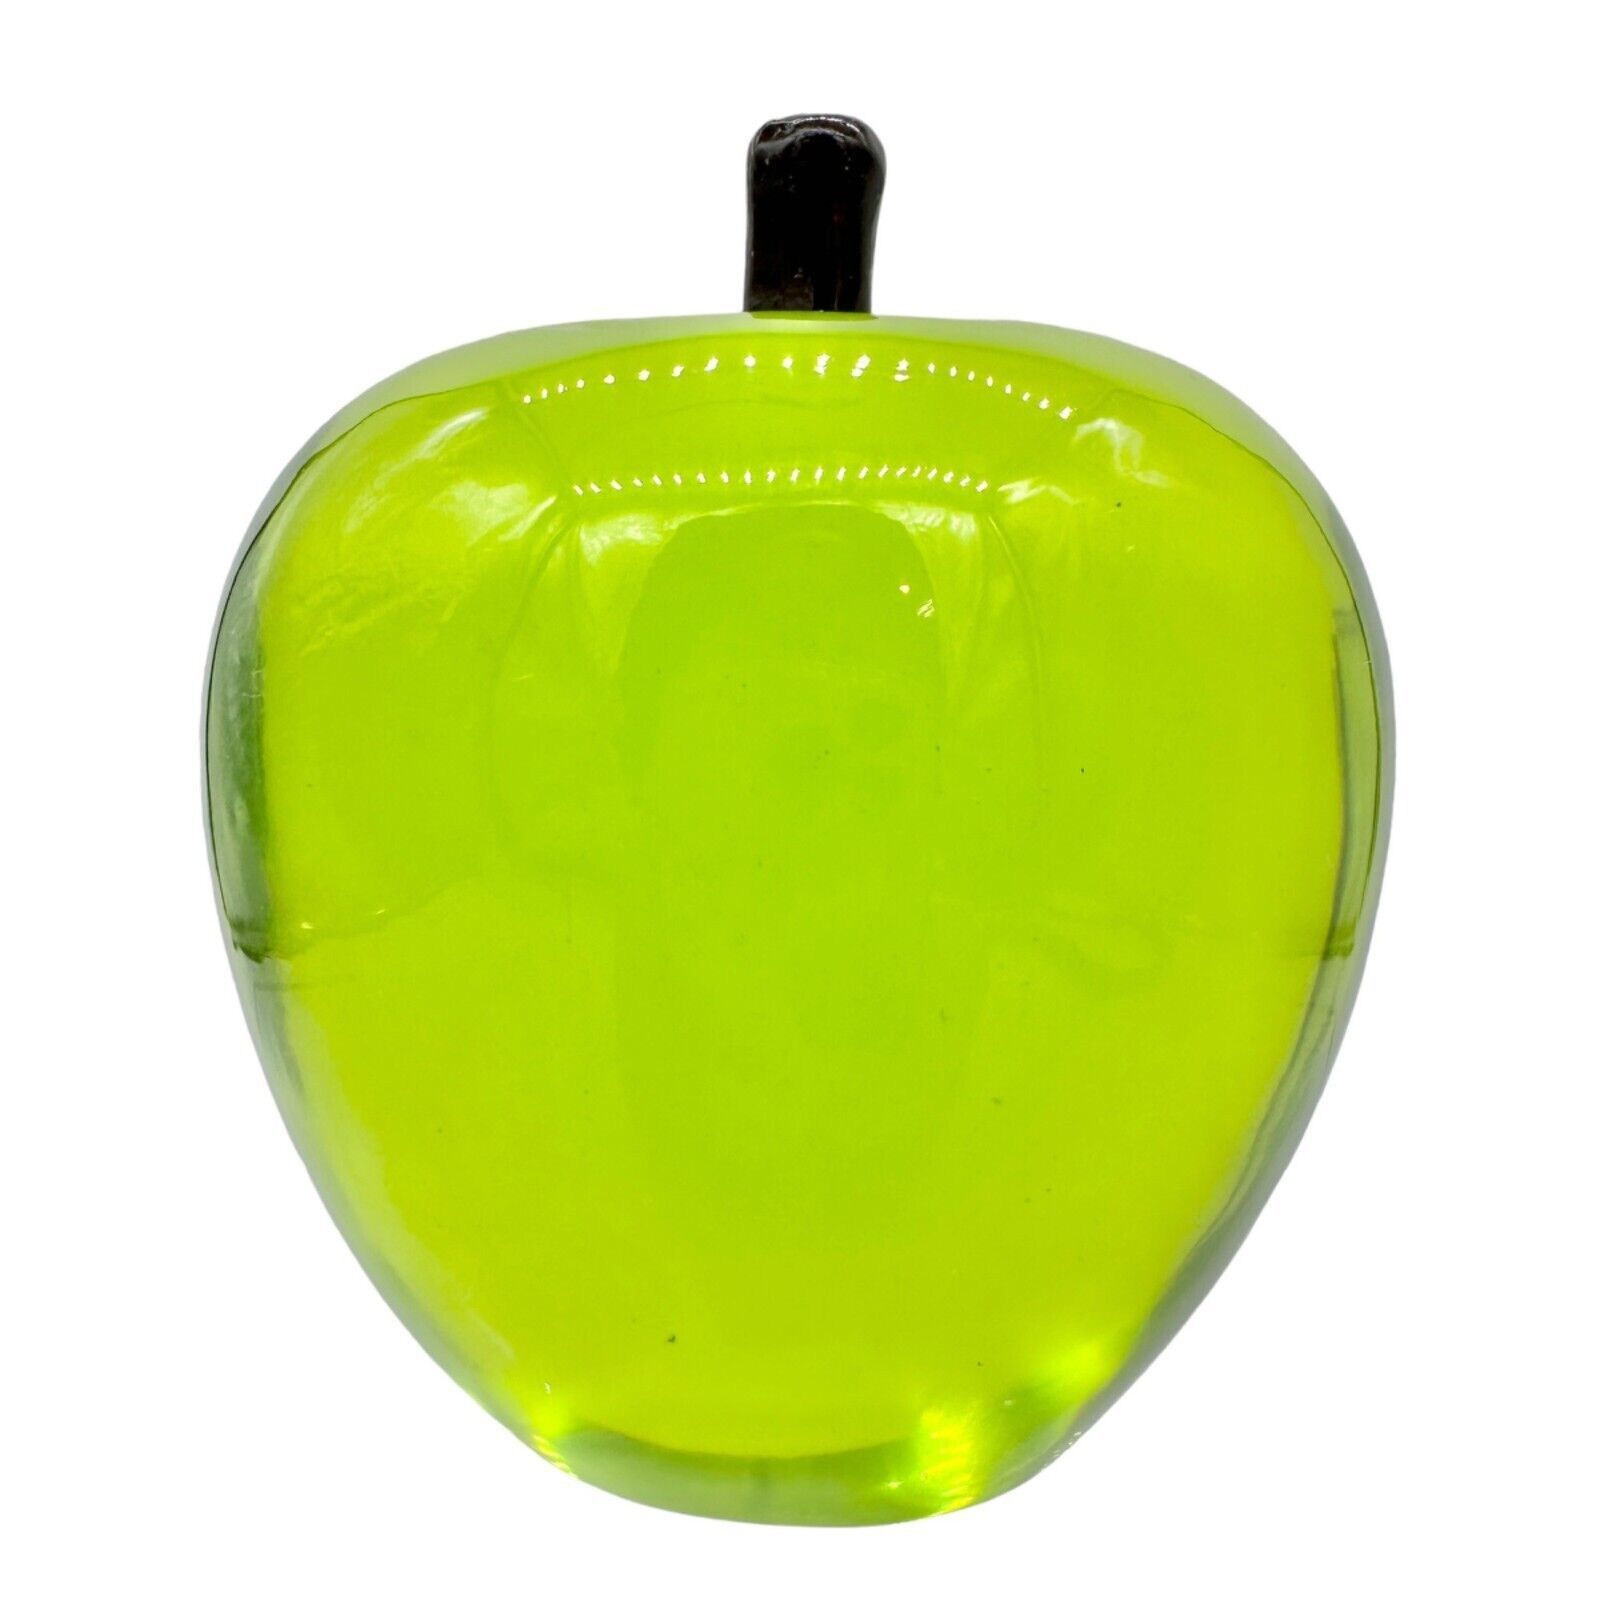 Primary image for PMA Museum Store Vintage Resin Apple 3 inch Green EUC